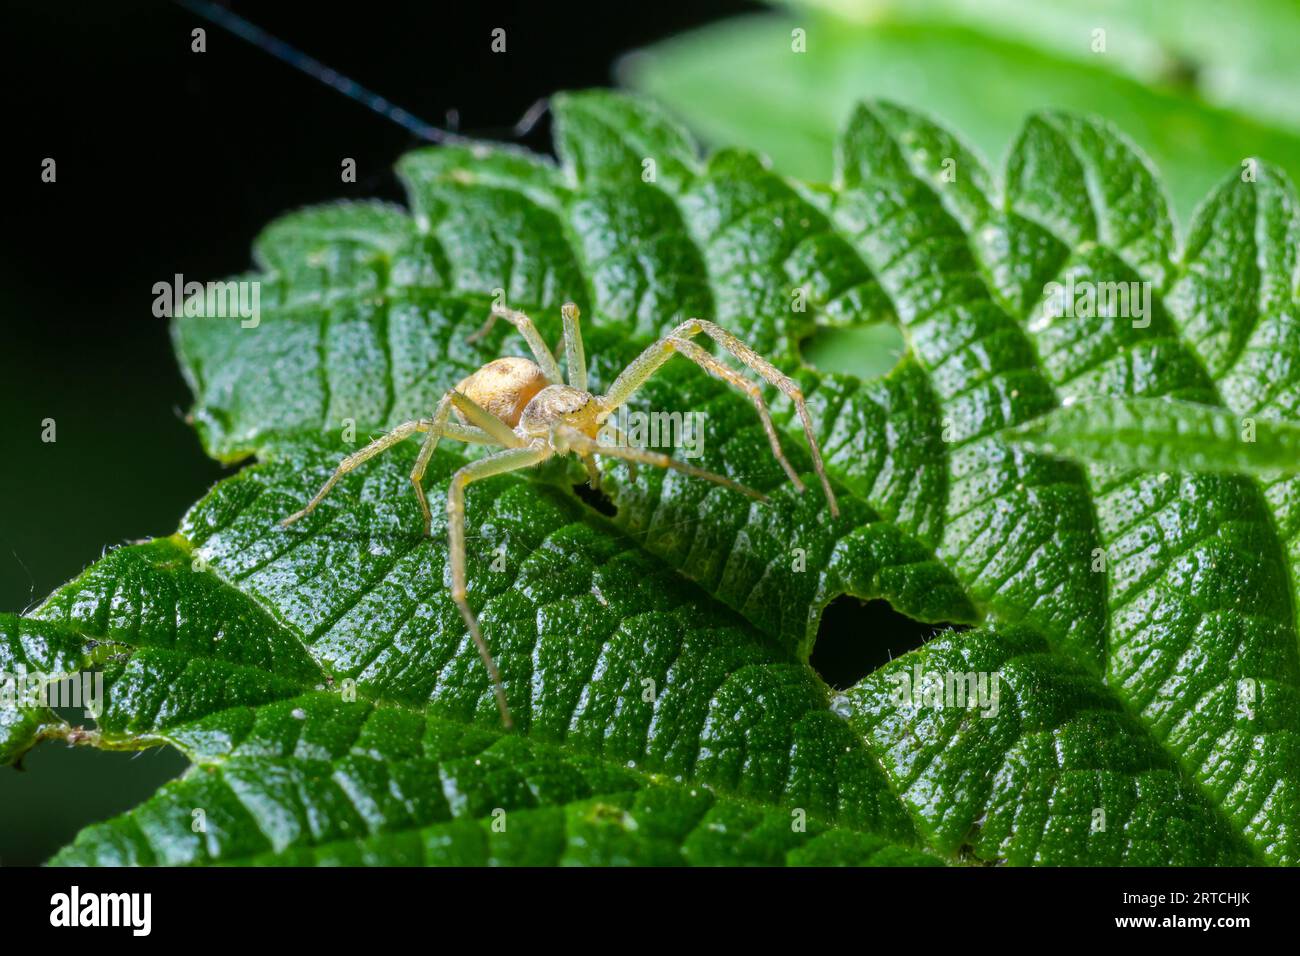 Spider Misumena vatia goldenrod crab spider or flower is a species of crab spider with holarctic distribution, belongs to the family Thomisidae. Stock Photo